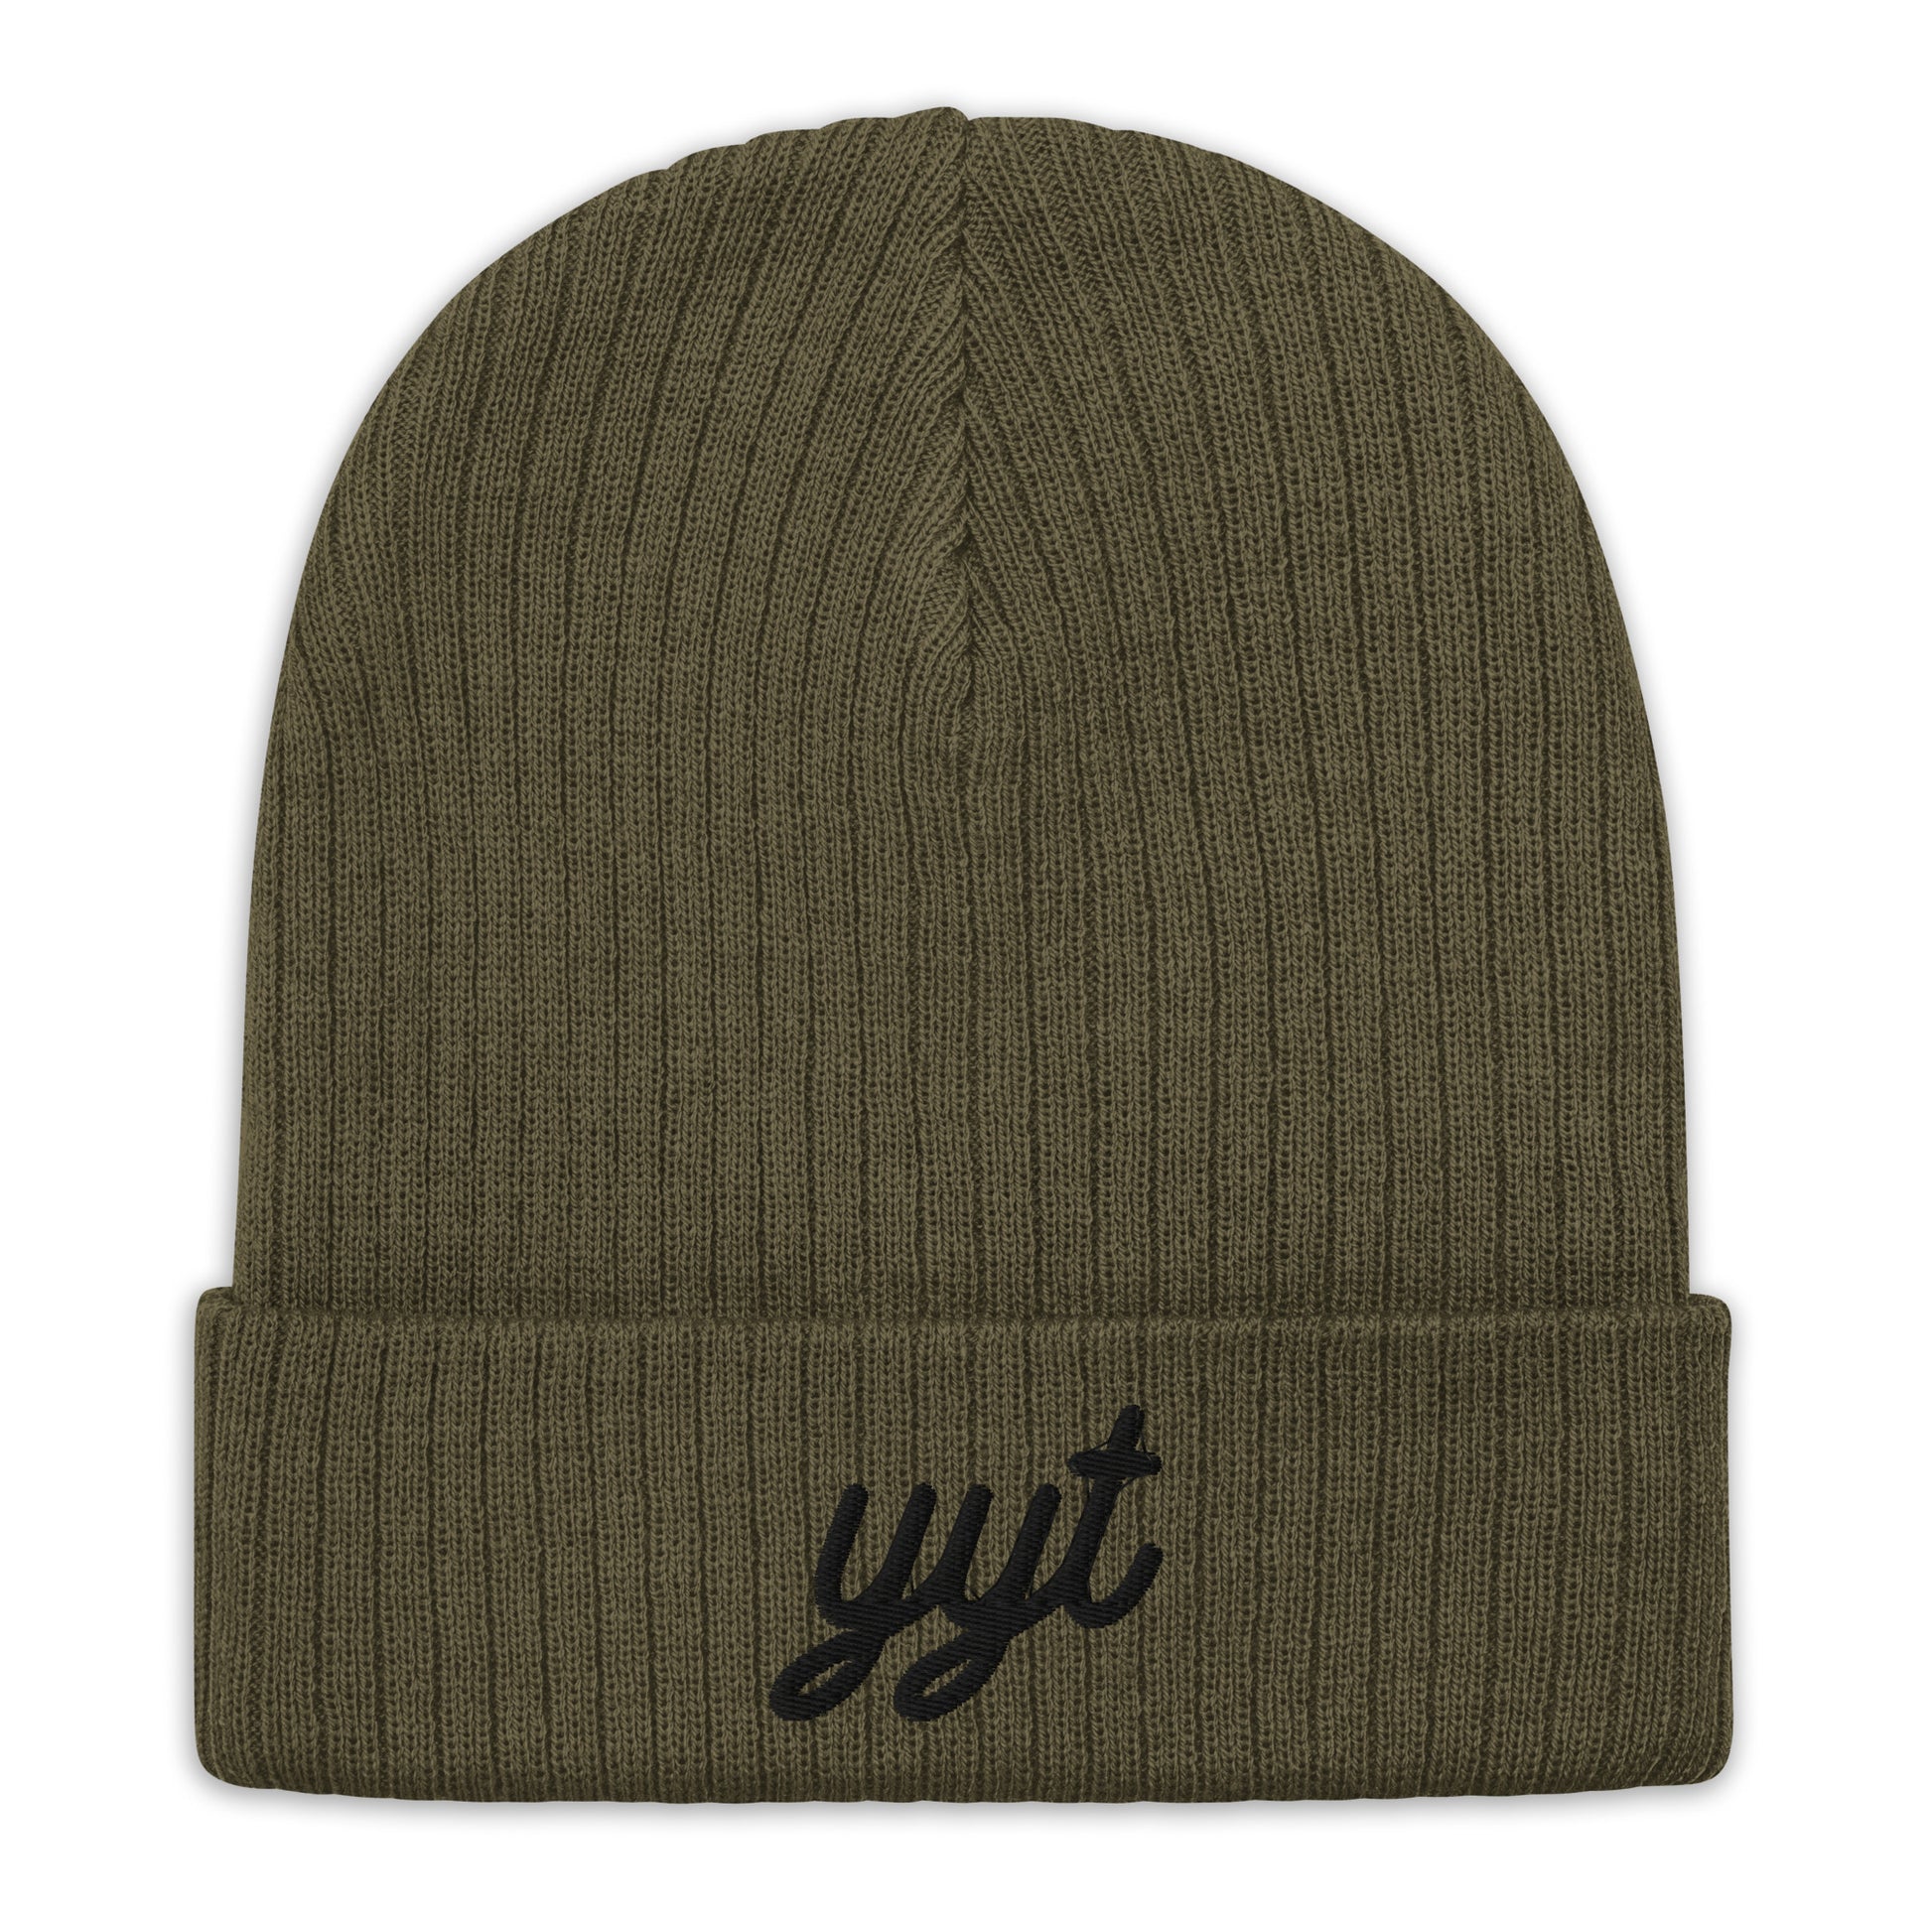 Vintage Script Recycled Cuffed Beanie • YYT St. John's • YHM Designs - Image 09